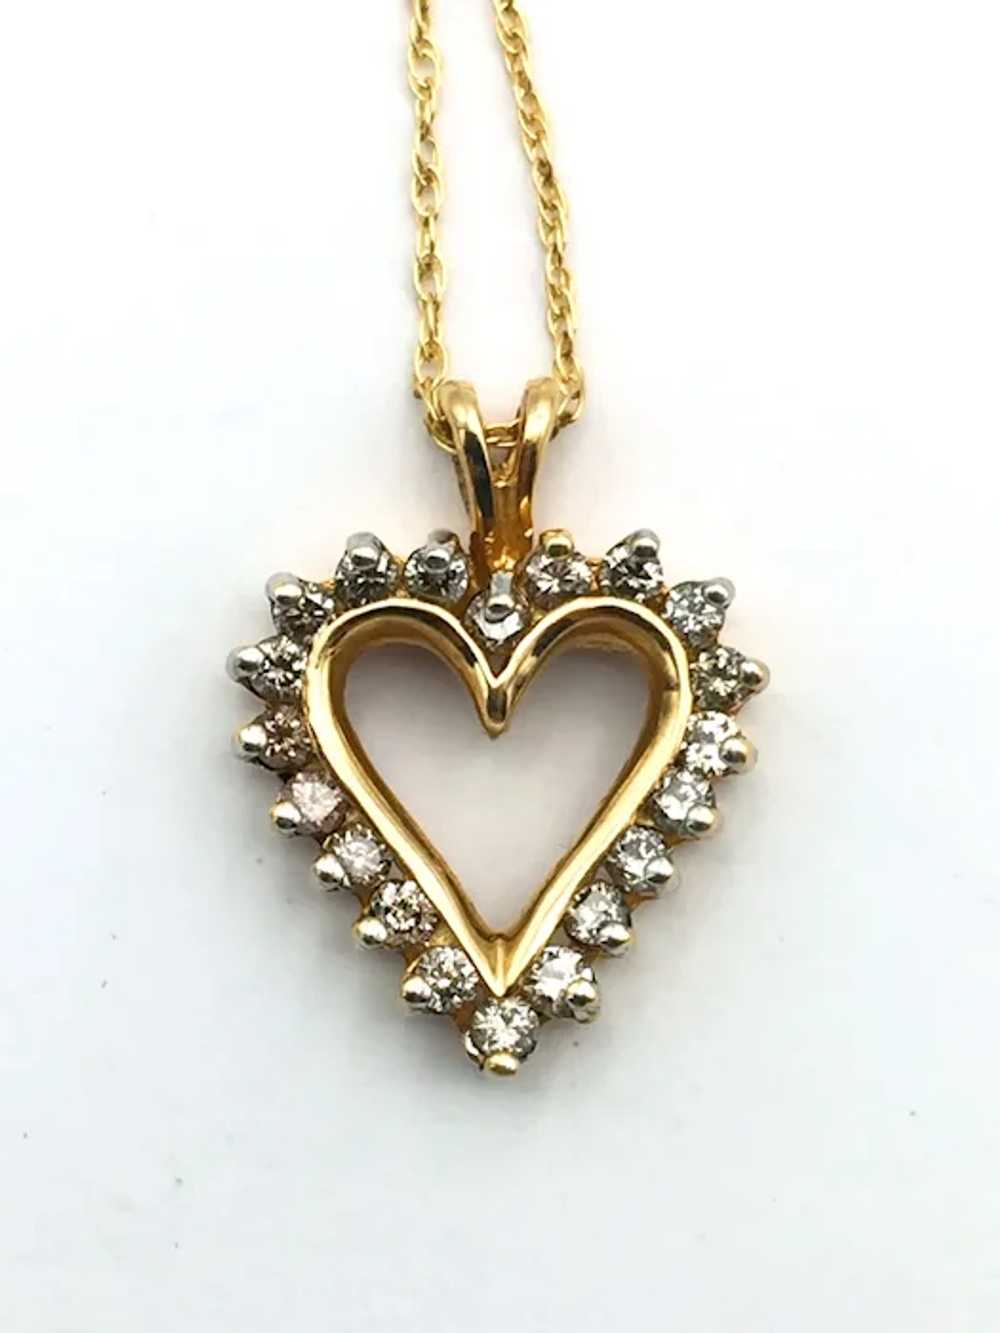 10KY 0.40ctw Diamond Heart Pendant with 18'' Chain - image 2